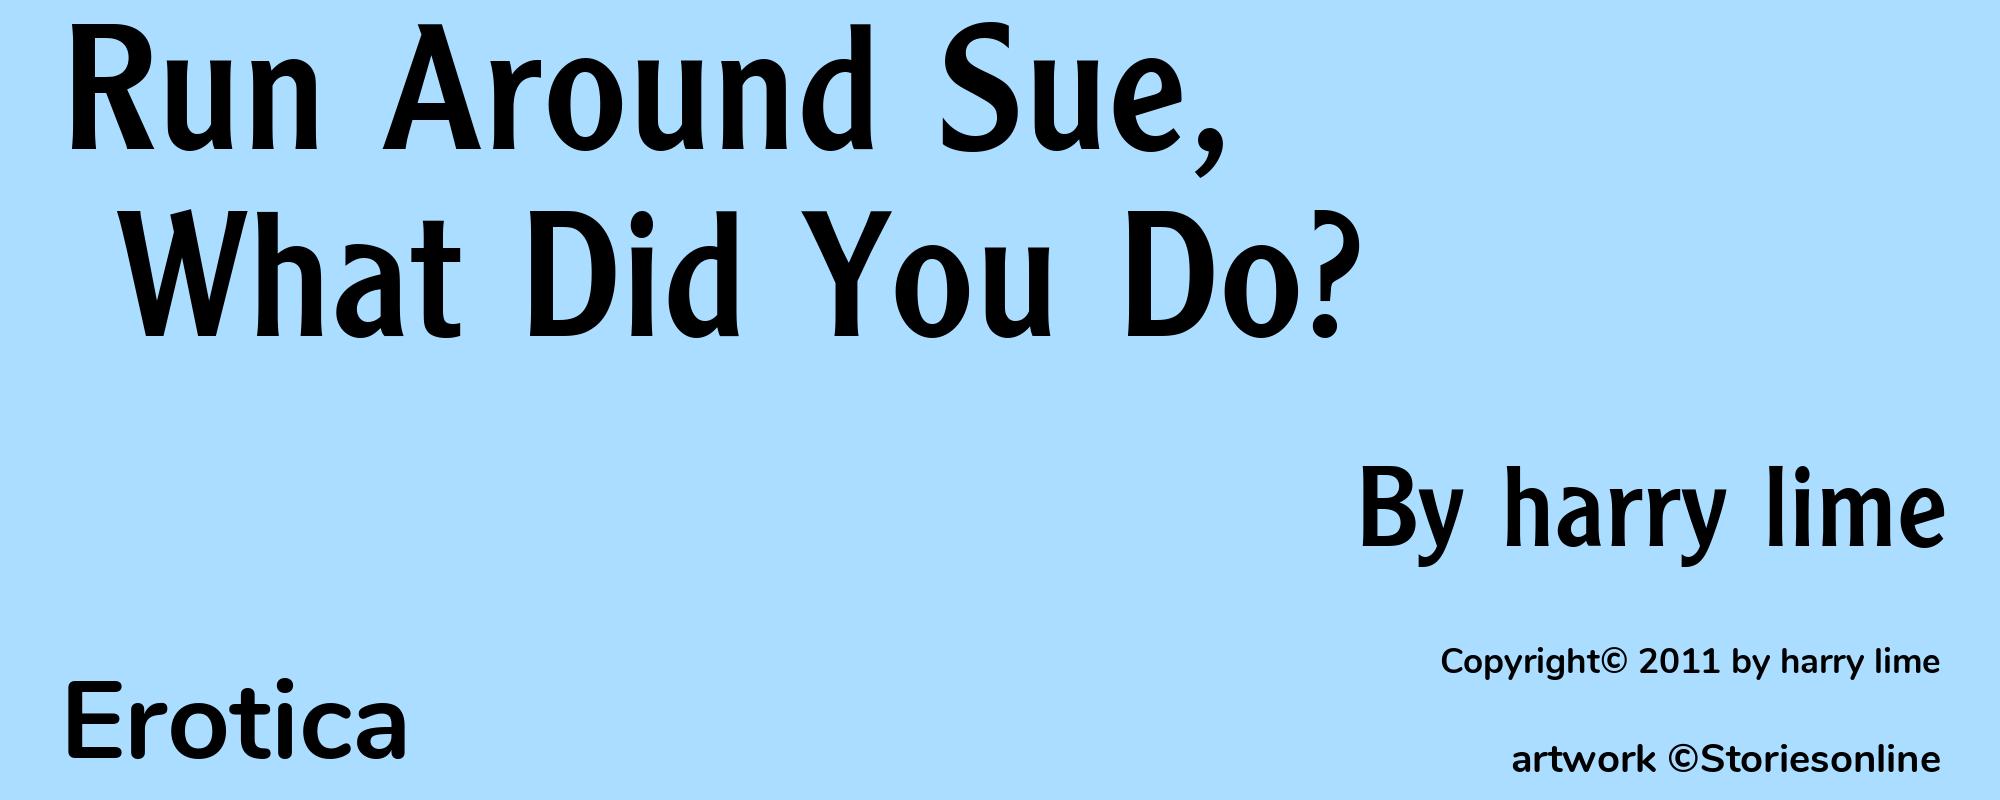 Run Around Sue, What Did You Do? - Cover